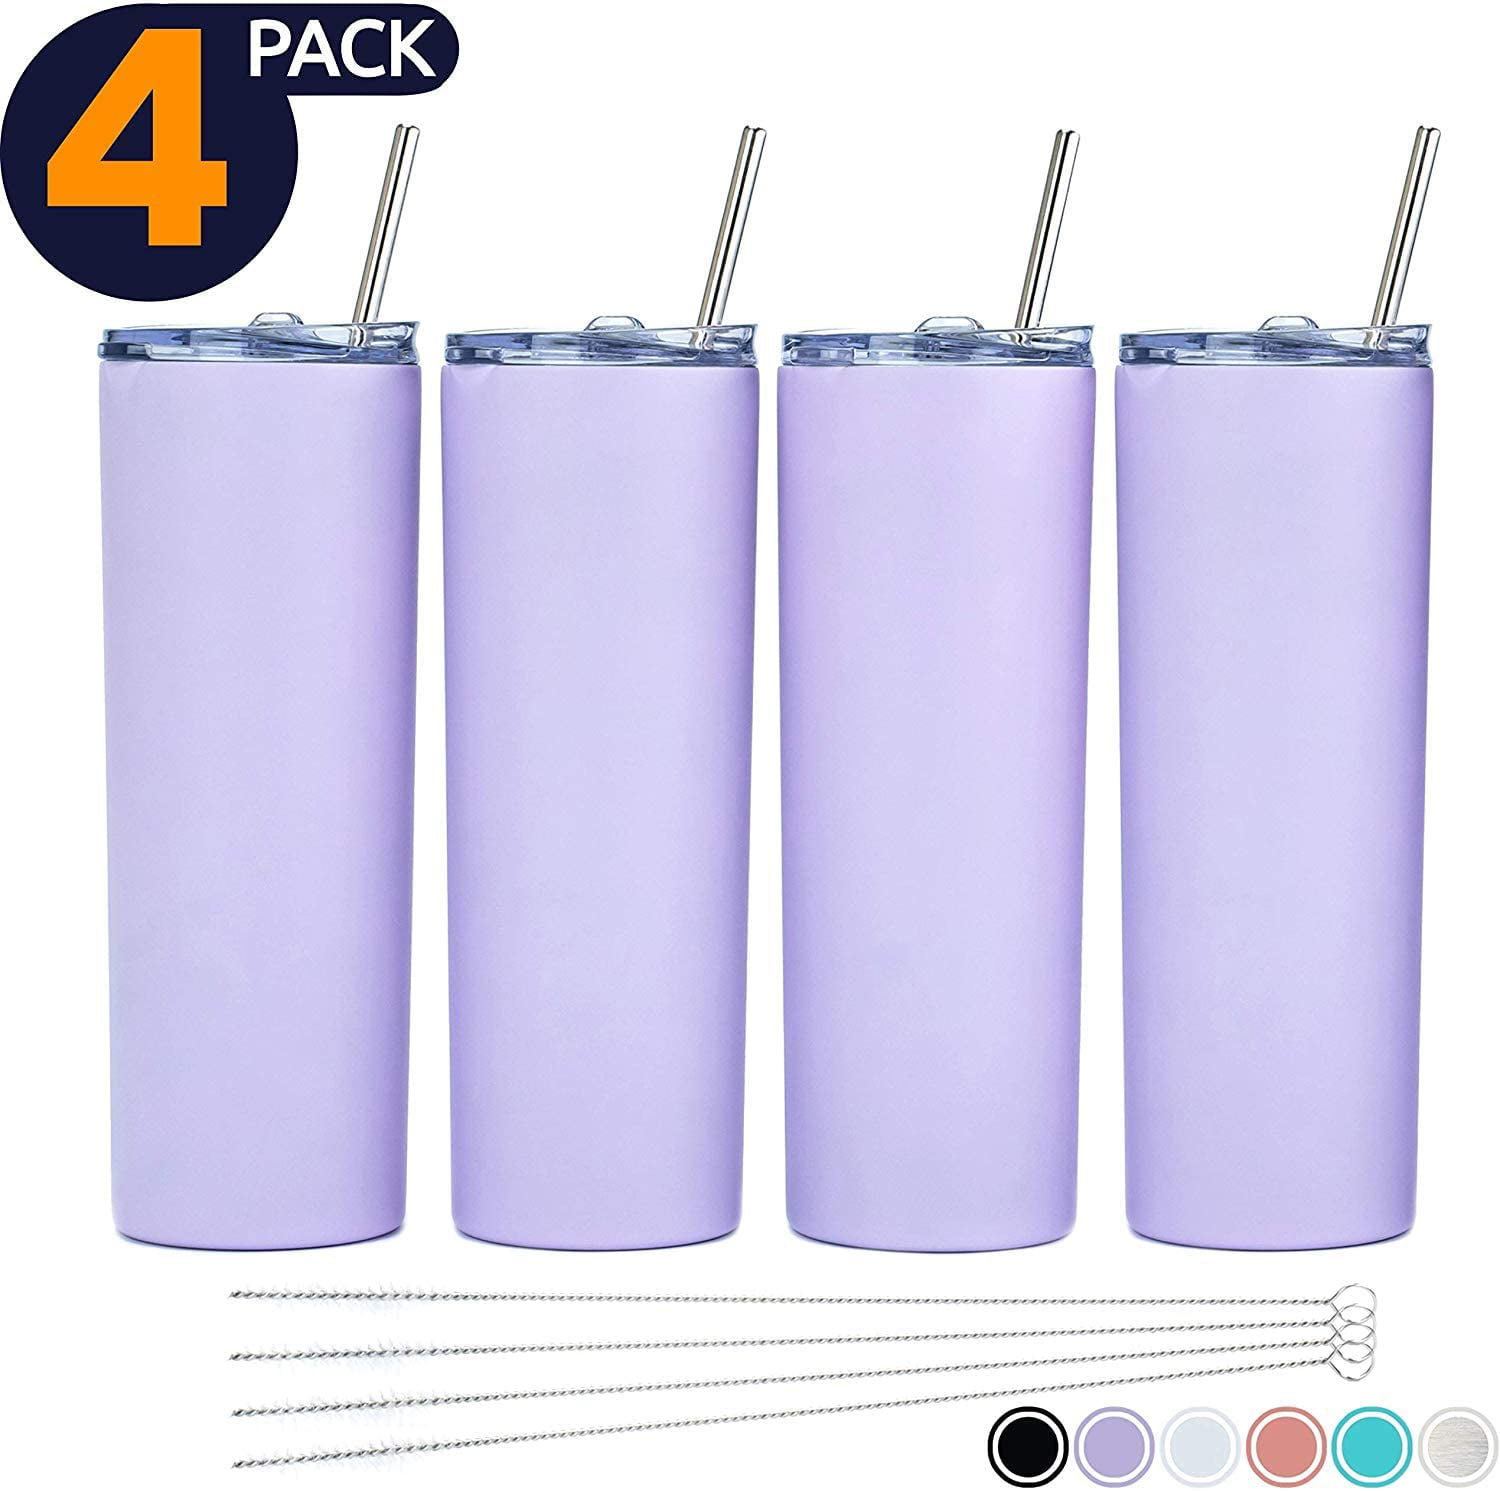 Zonegrace 4 Pack Skinny Tumbler Multi color,20 oz Stainless Steel Double-Insulated Water Tumbler Cup set of 4 With Lid and Straw assorted color,Vacuum Travel Mug Gift for Men and Women